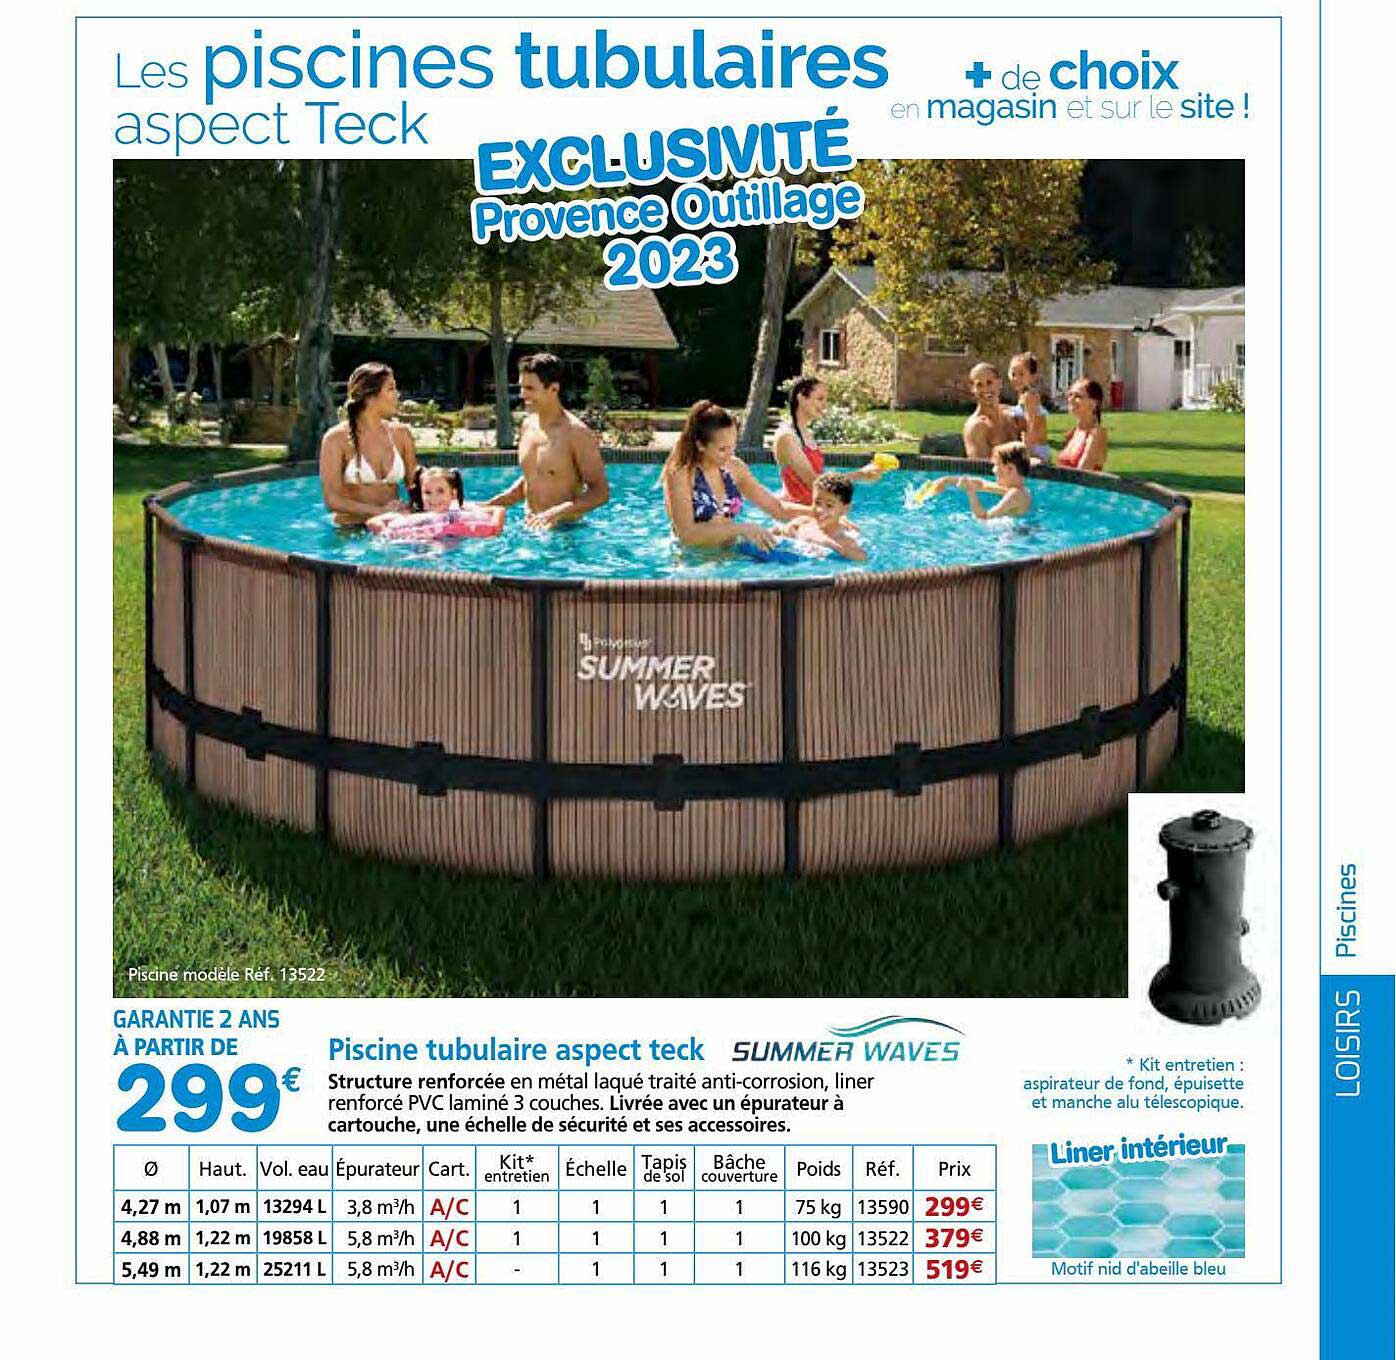 Piscine tubulaire (5,49x2,74x1,32m) Summer Waves - Provence Outillage